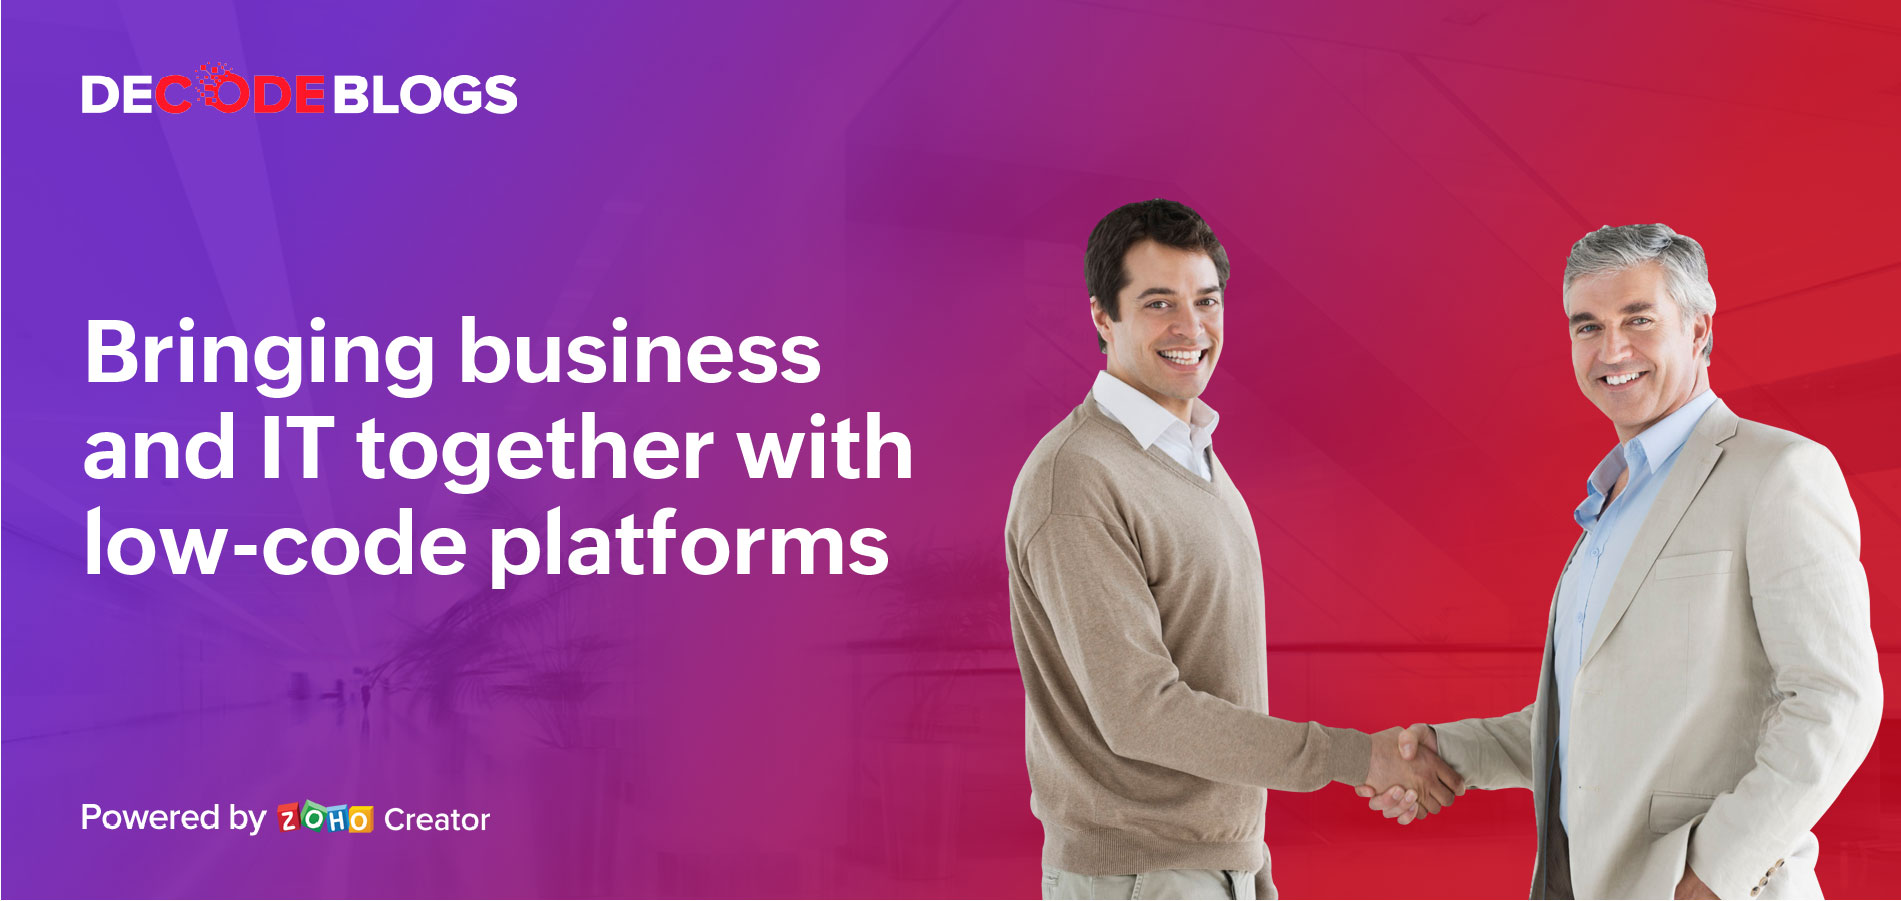  Bringing business and IT together with low-code platforms